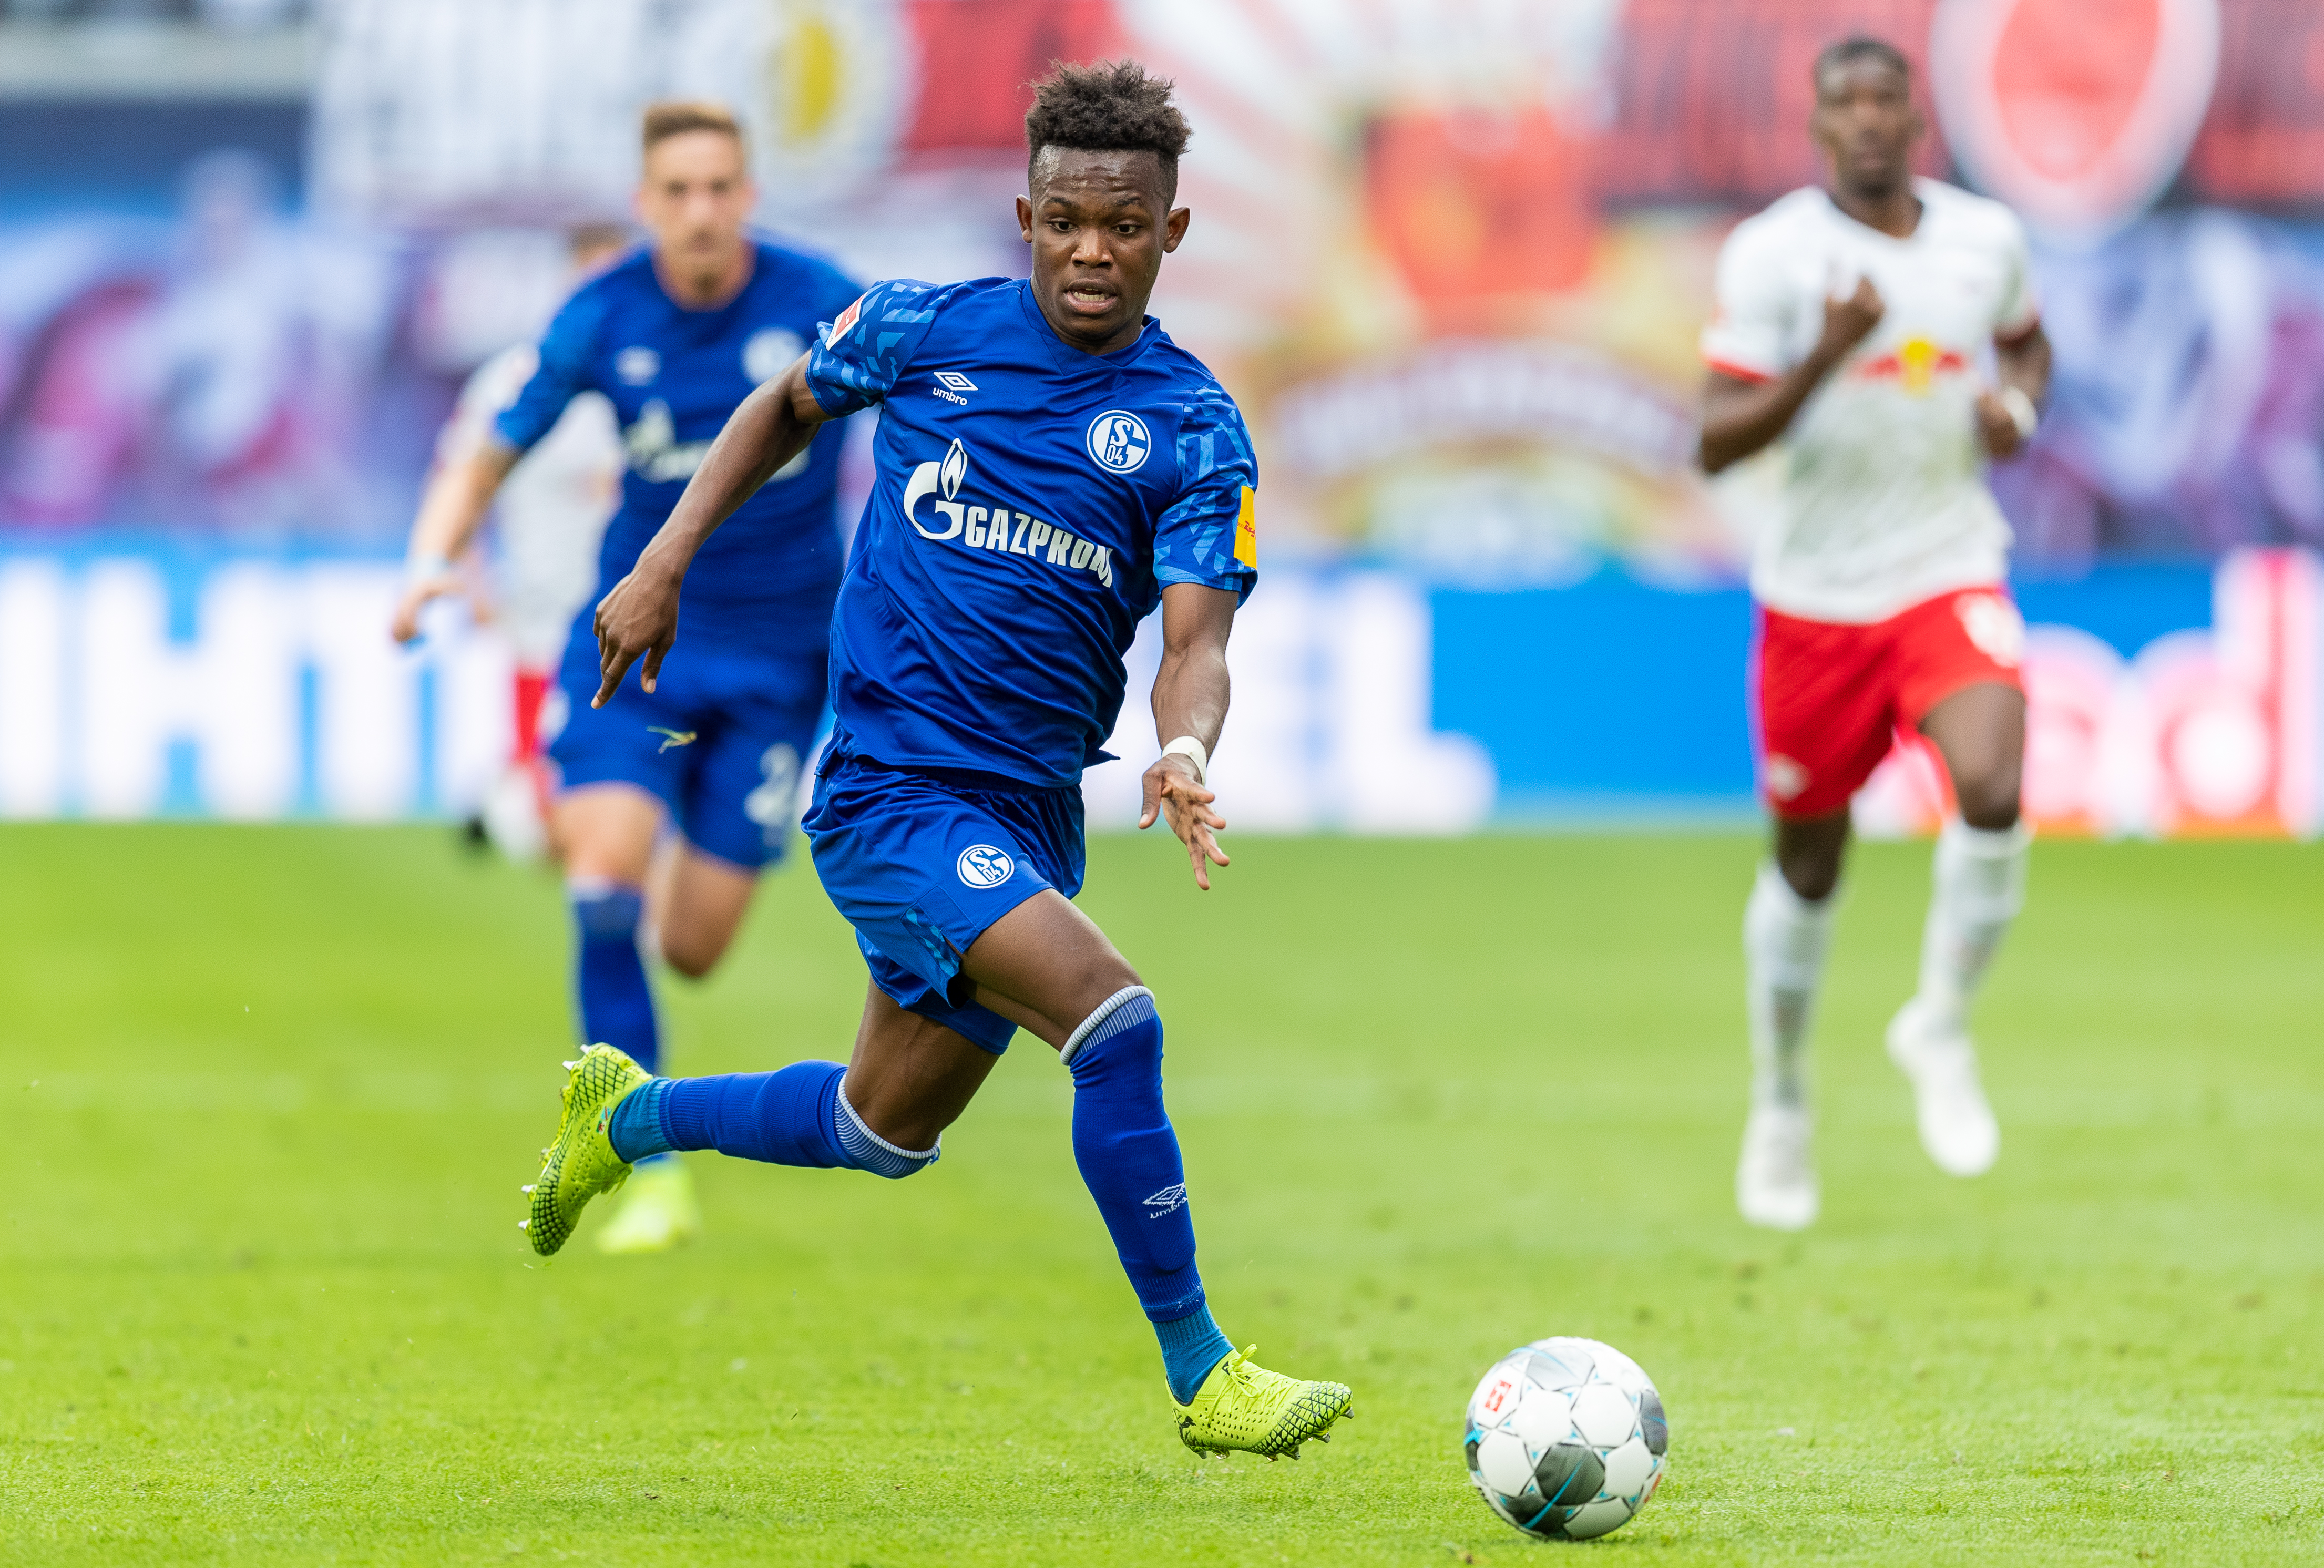 LEIPZIG, GERMANY - SEPTEMBER 28: Rabbi Matondo Baba of VfL Wolfsburg runs with the ball during the Bundesliga match between RB Leipzig and FC Schalke 04 at Red Bull Arena on September 28, 2019 in Leipzig, Germany. (Photo by Boris Streubel/Bongarts/Getty Images)